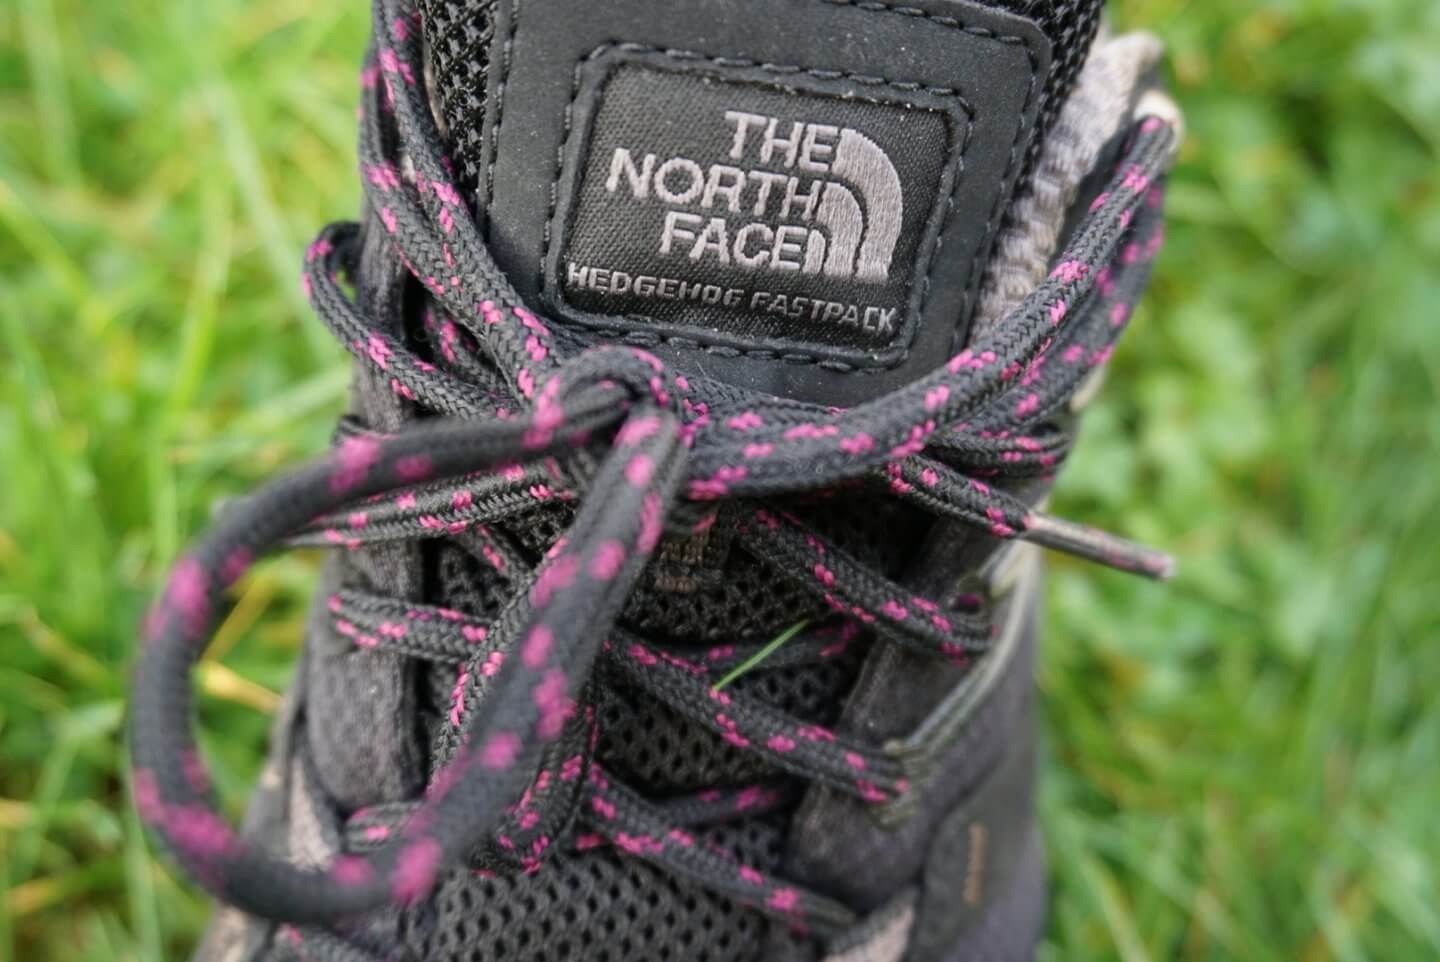 north face outdoor gear millets where is tara povey top Irish travel blogger